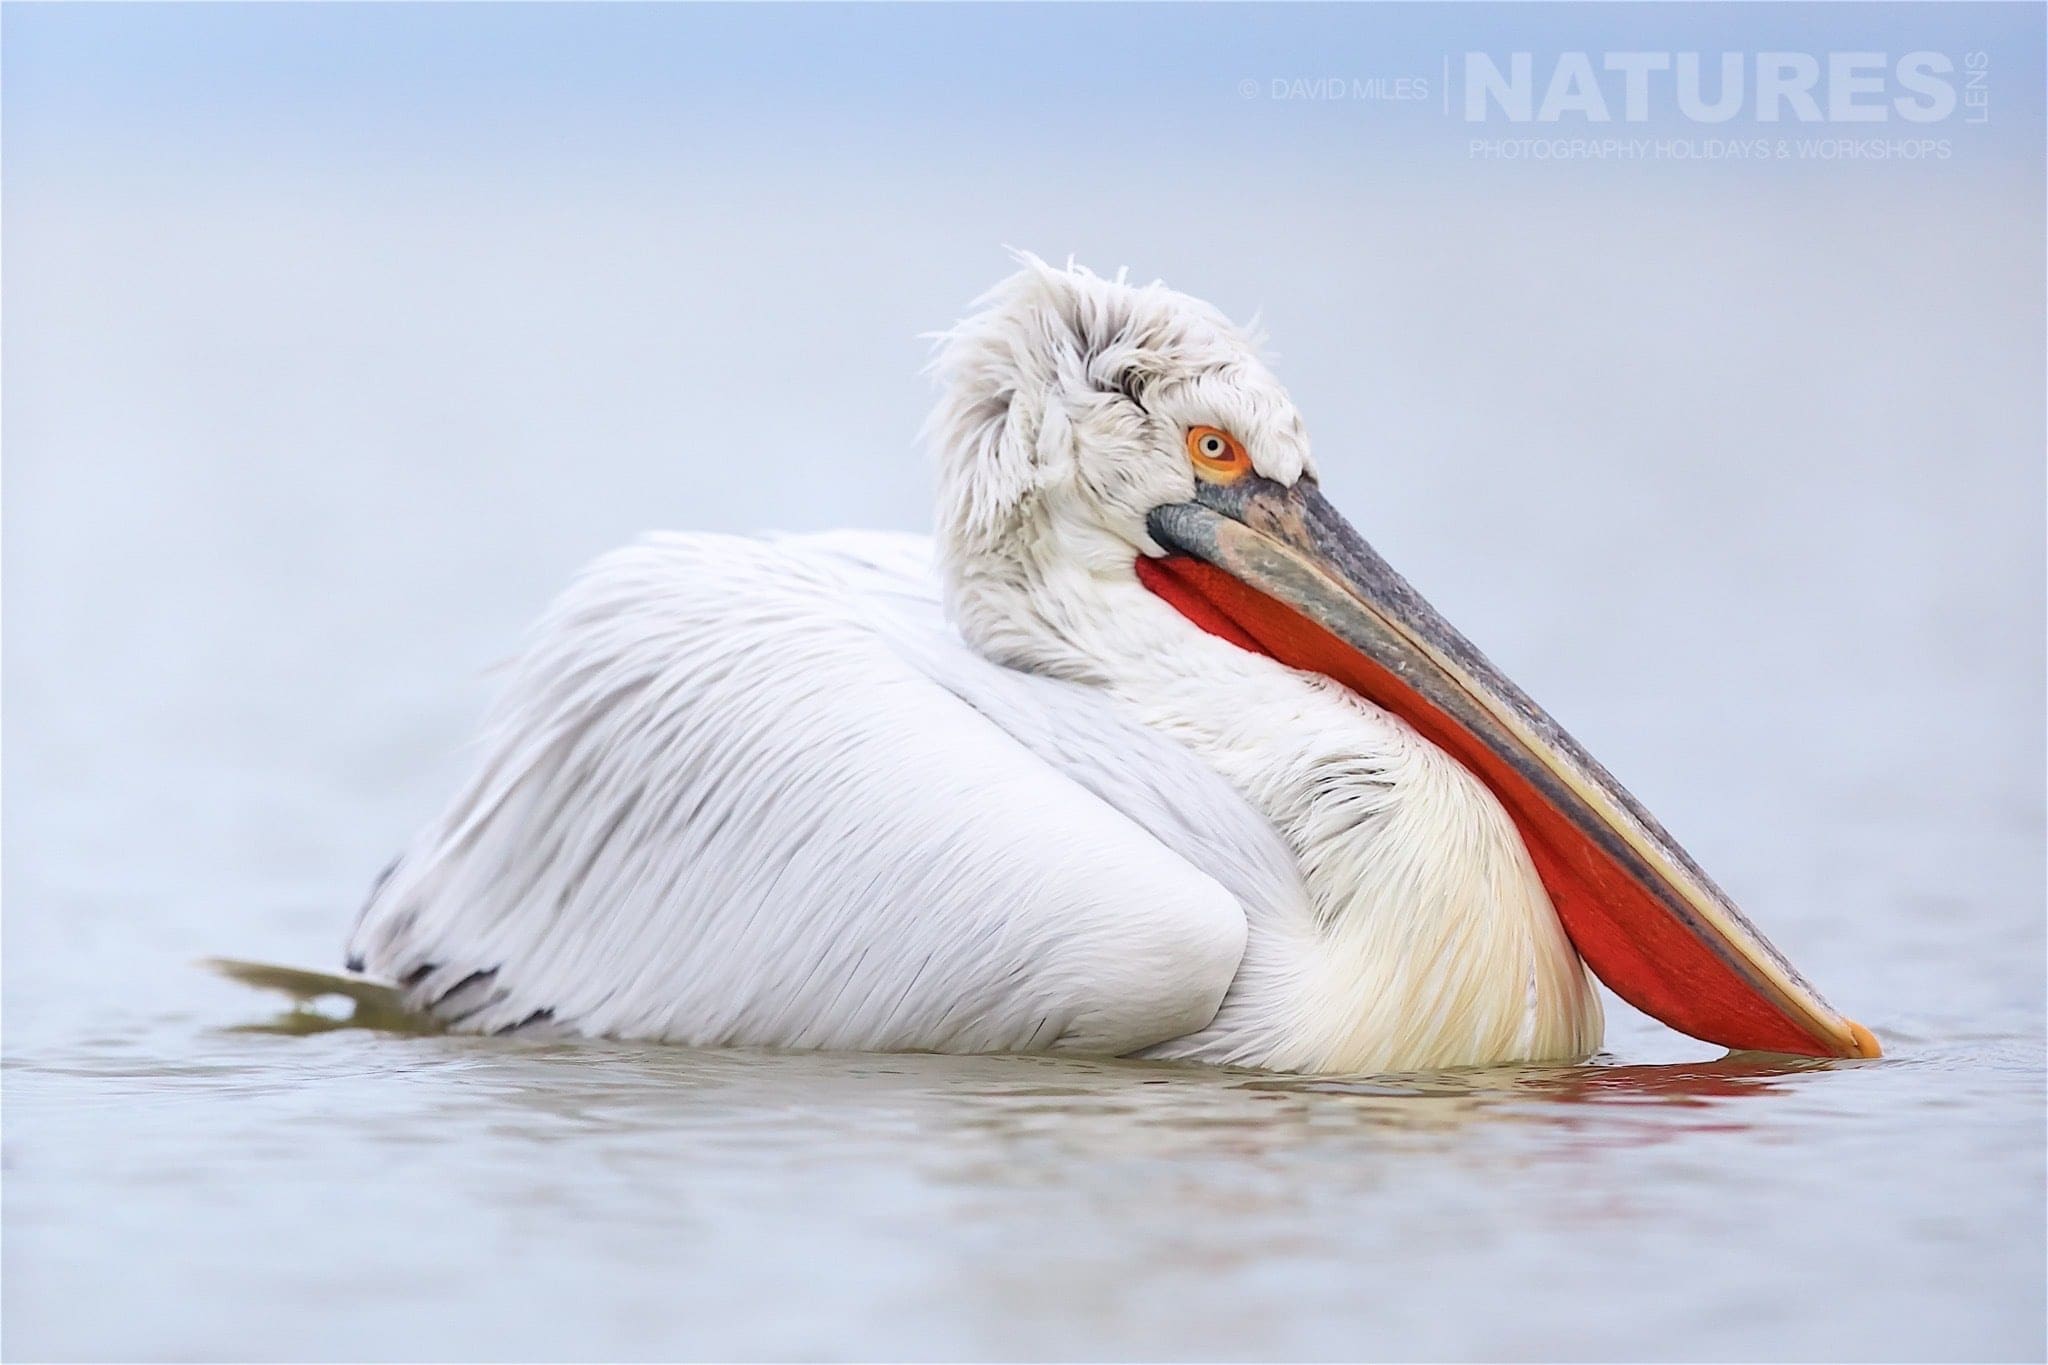 Almost prehistoric in appearance the dalmatian pelicans of Greece are extremely photoegenic photographed on the NaturesLens Dalmatian Pelicans of Lake Kerkini wildlife photography holiday